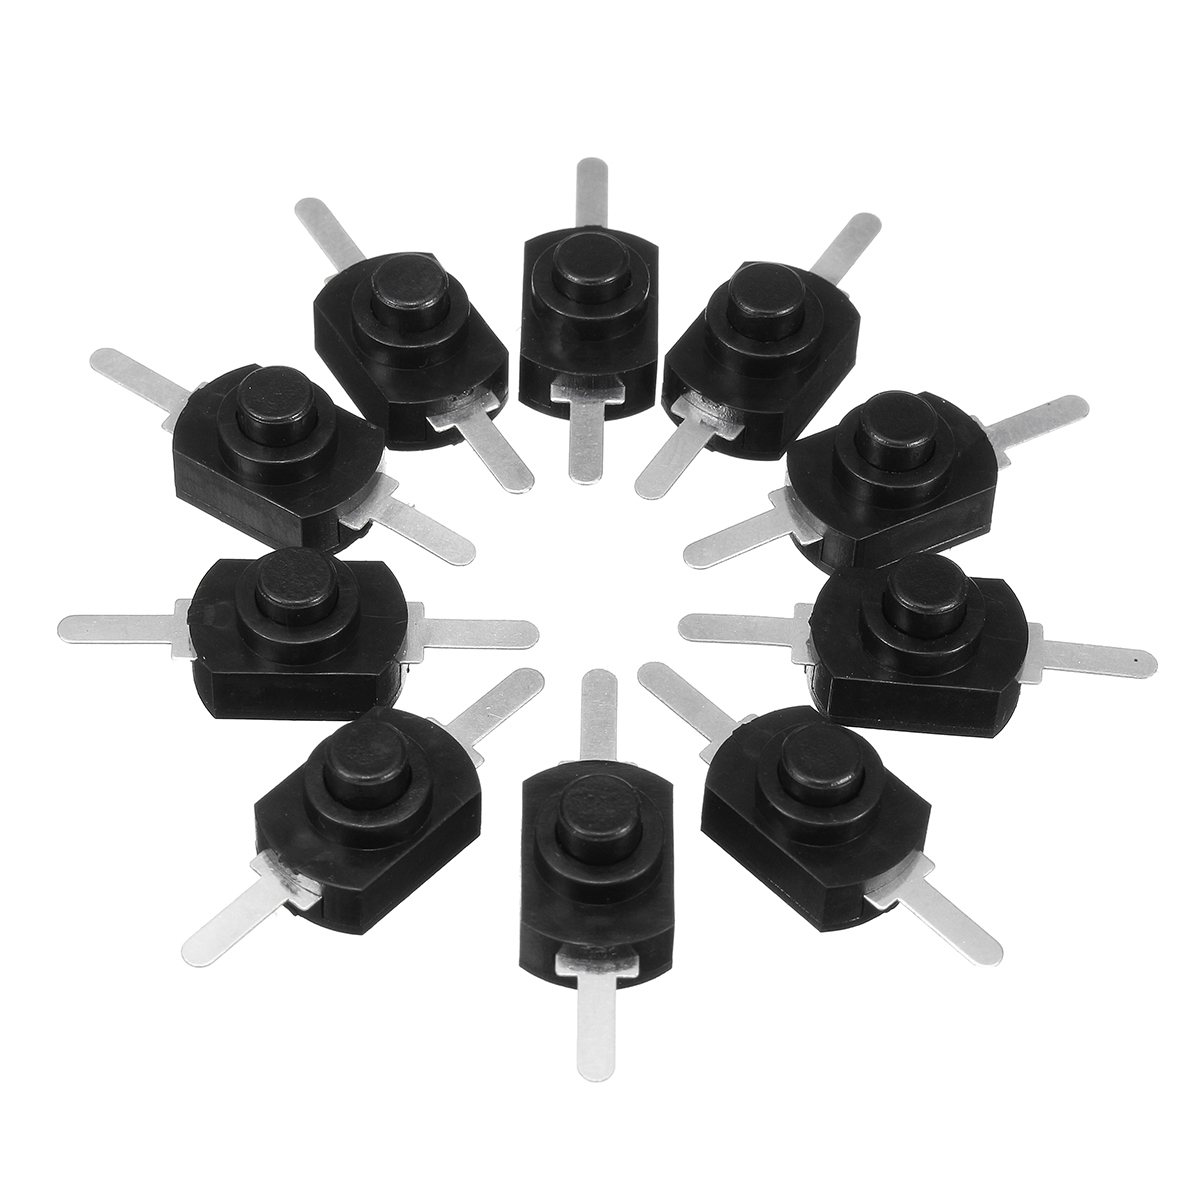 Excellway?® 10Pcs 1A 30V DC 250V Black Latching On Off Mini Push Button Switch 2